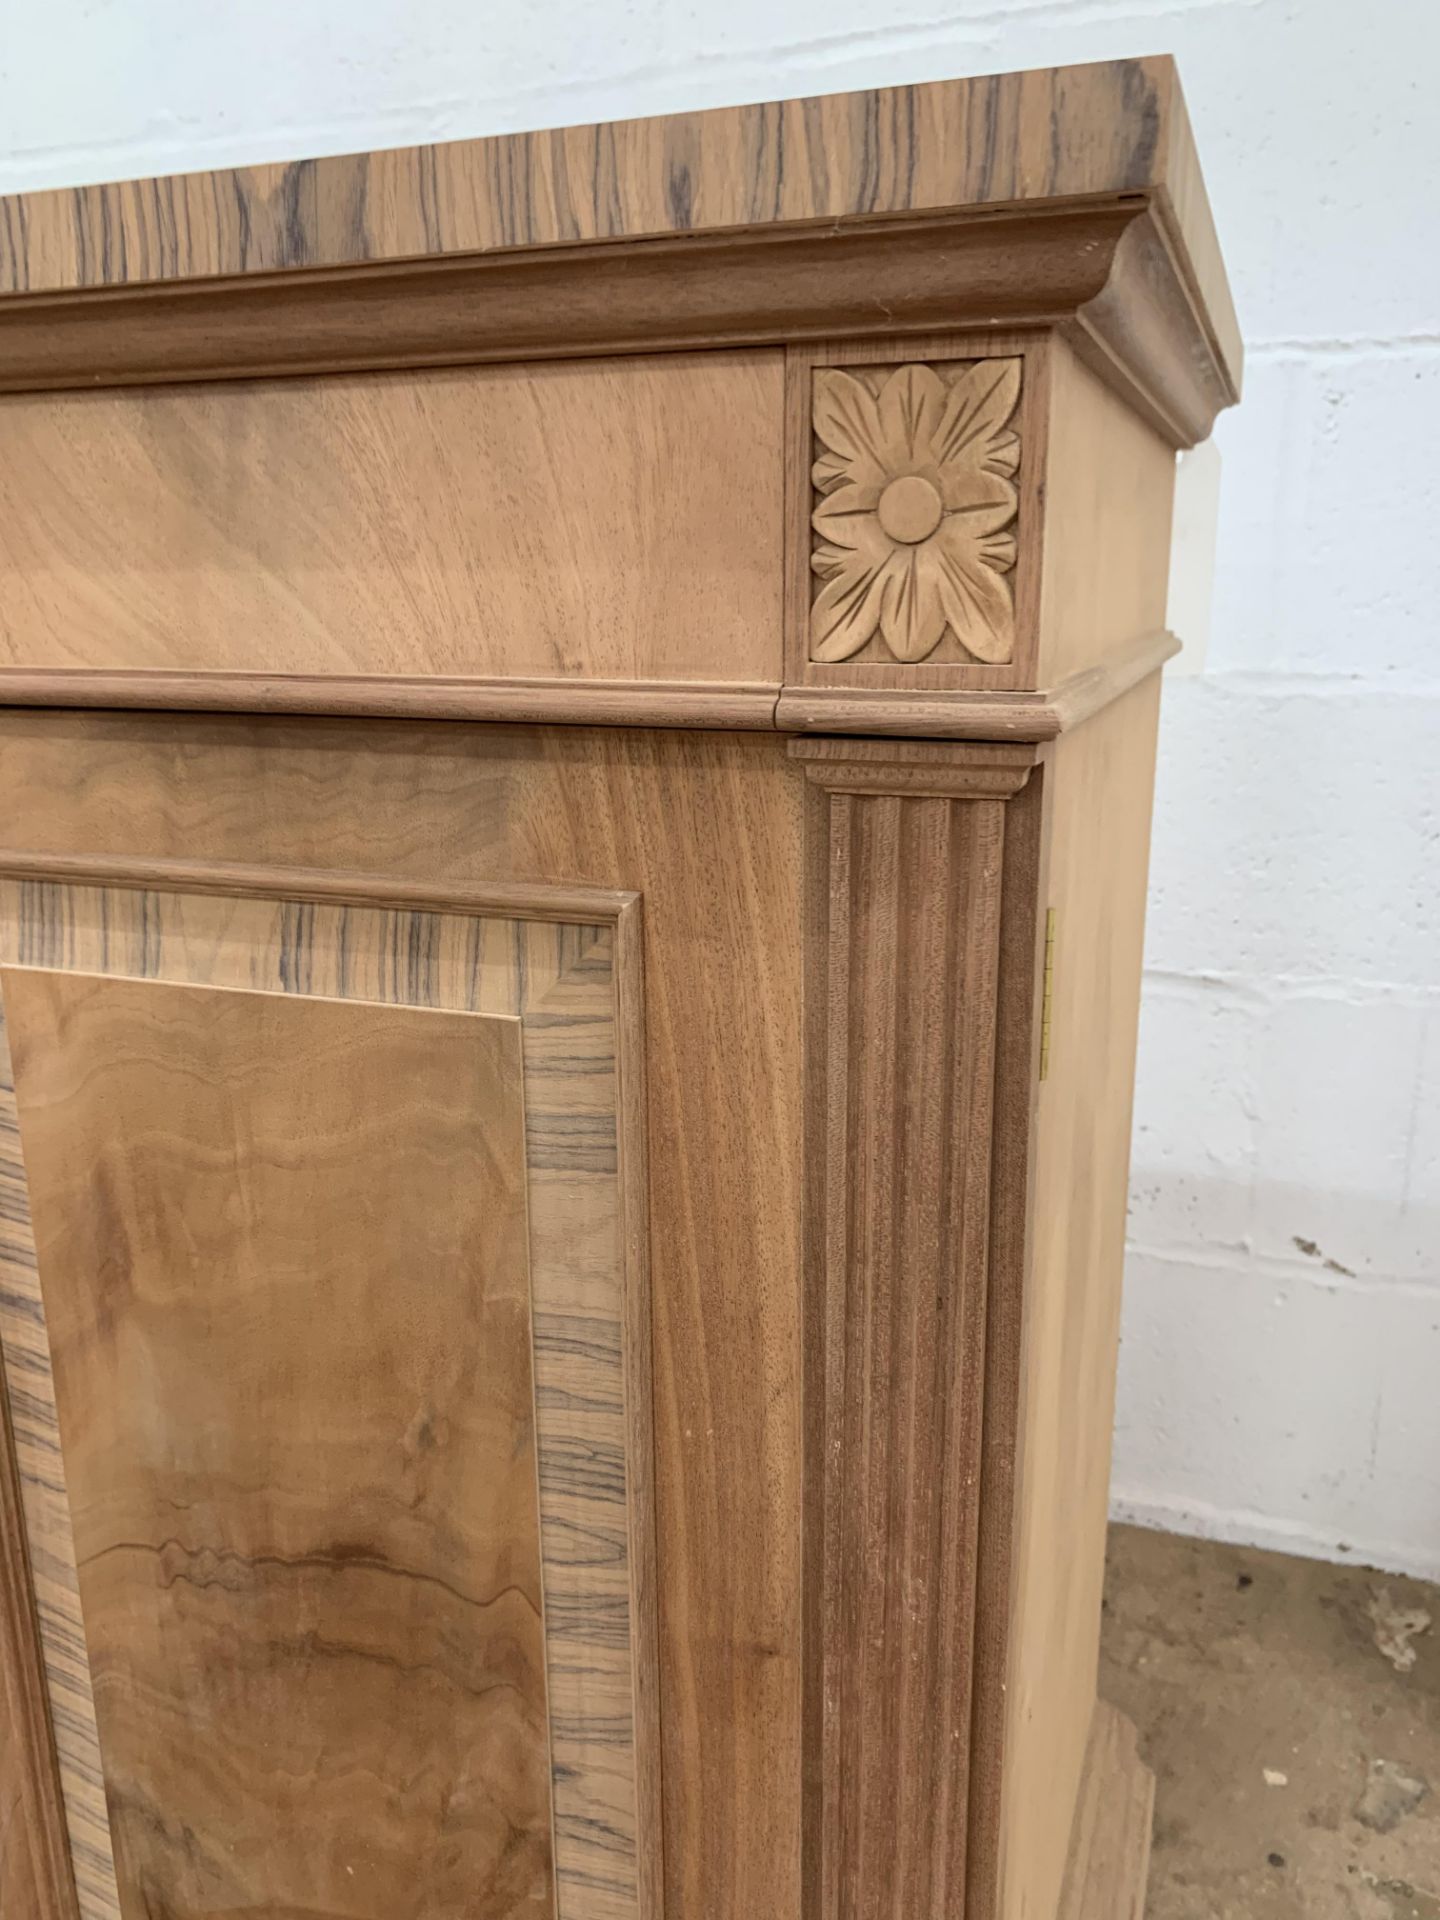 Small two-door Sideboard, in Mahogany finish, from the Corinthian range, requires finishing/ - Image 2 of 5